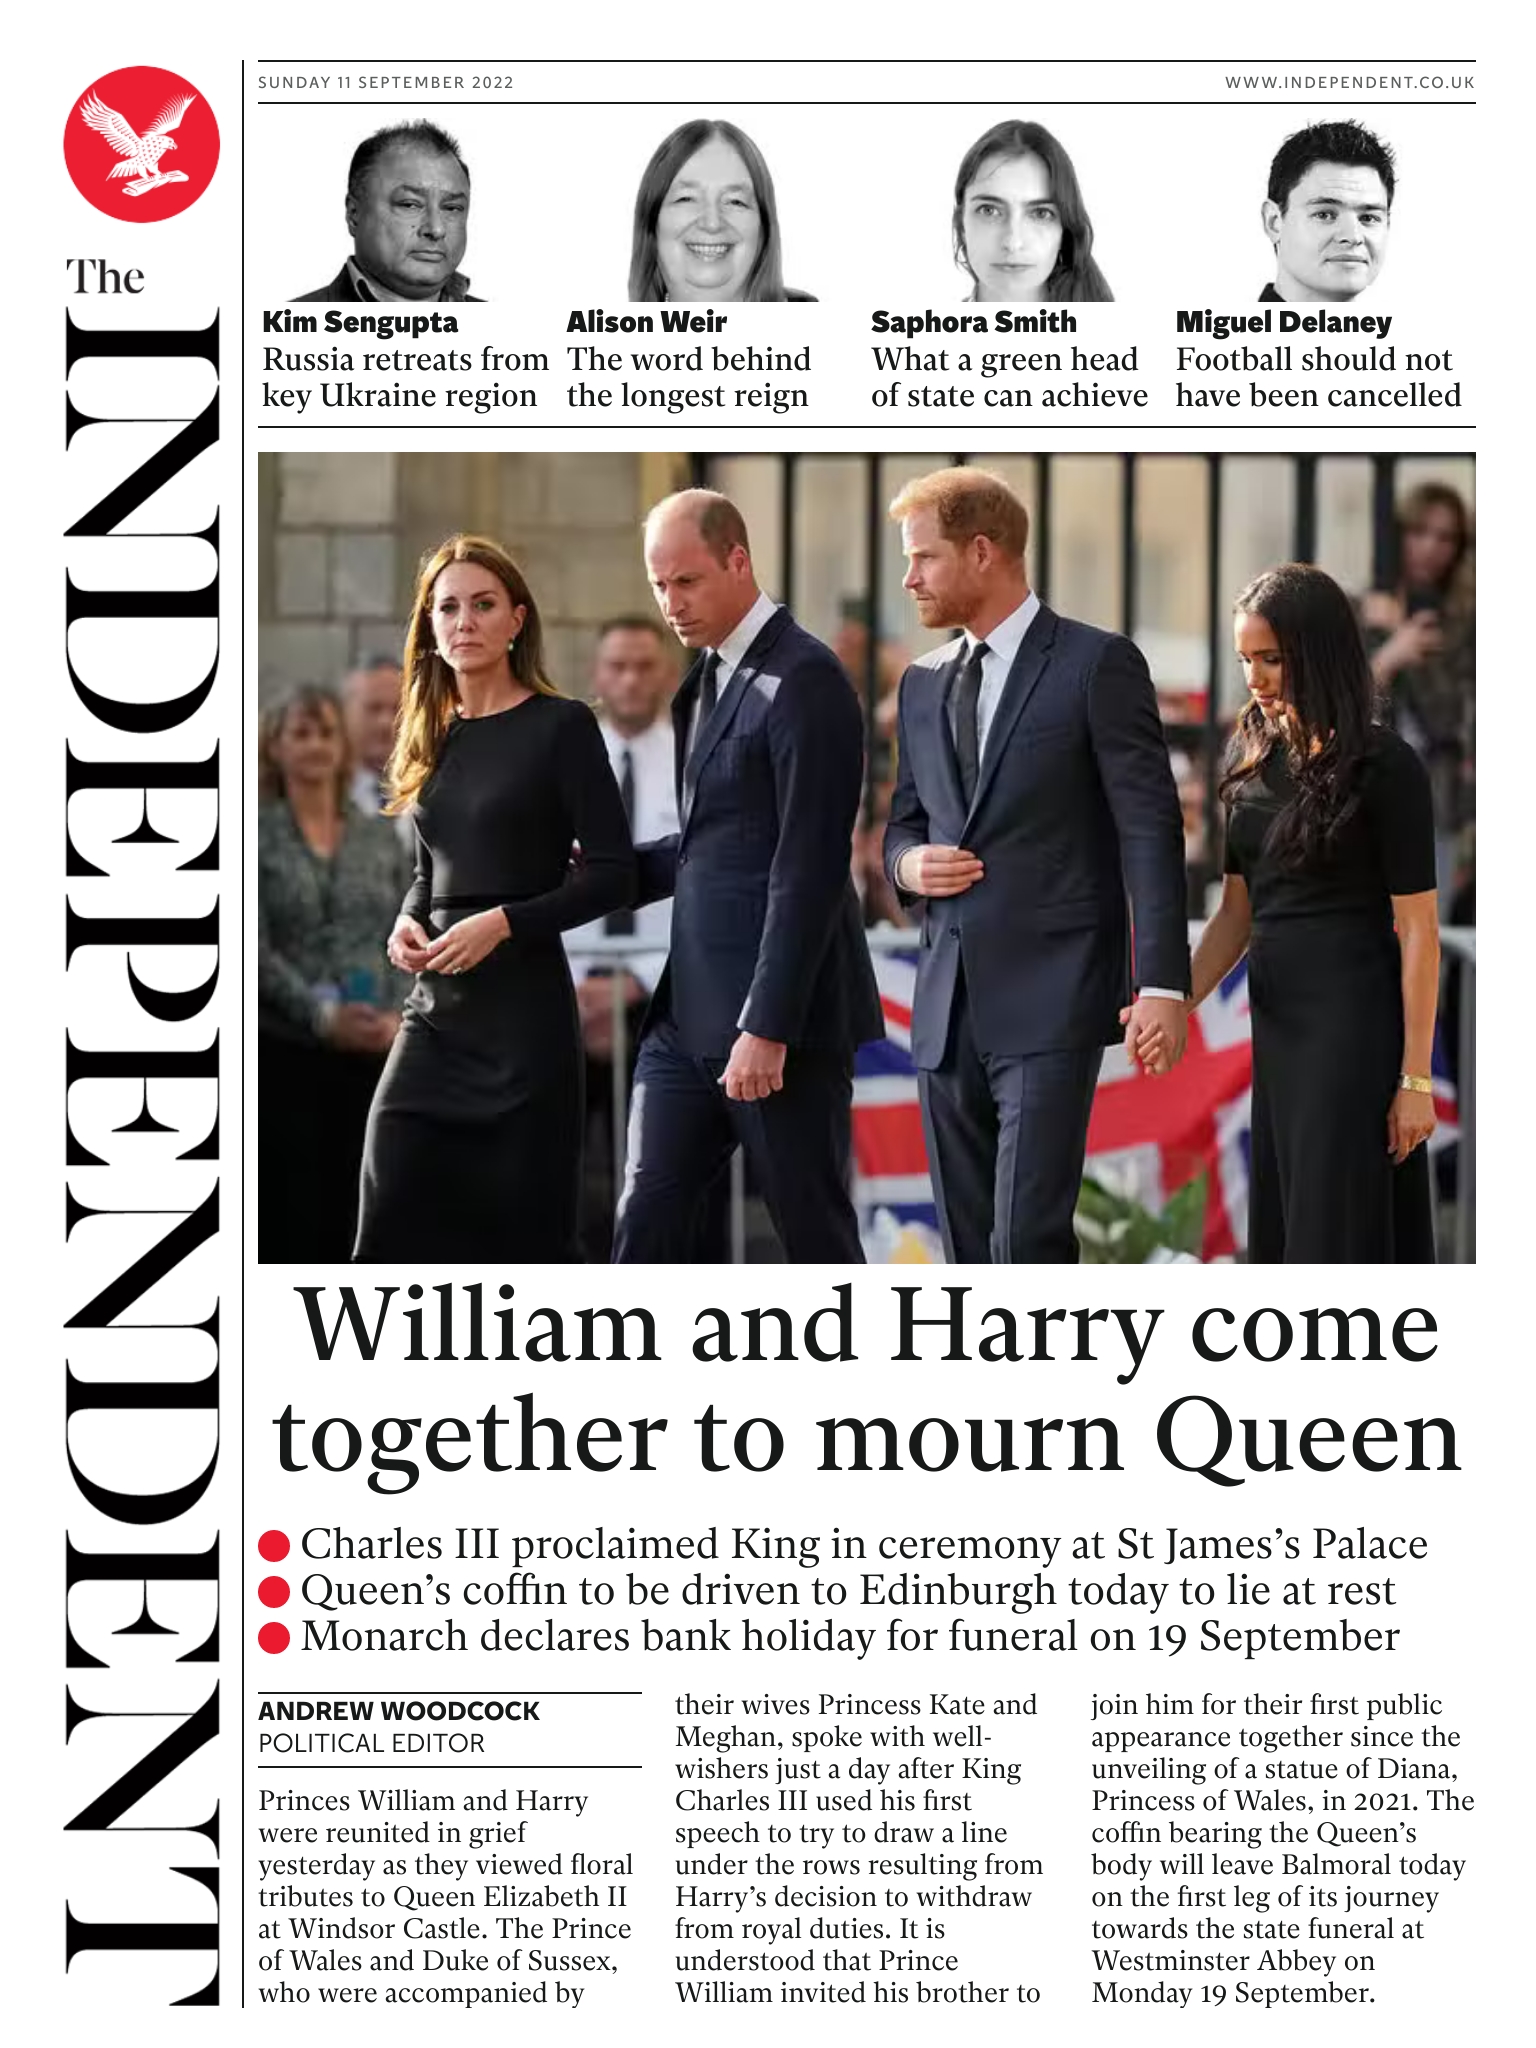 The Indepedent - William and Harry come together to mourn the Queen 